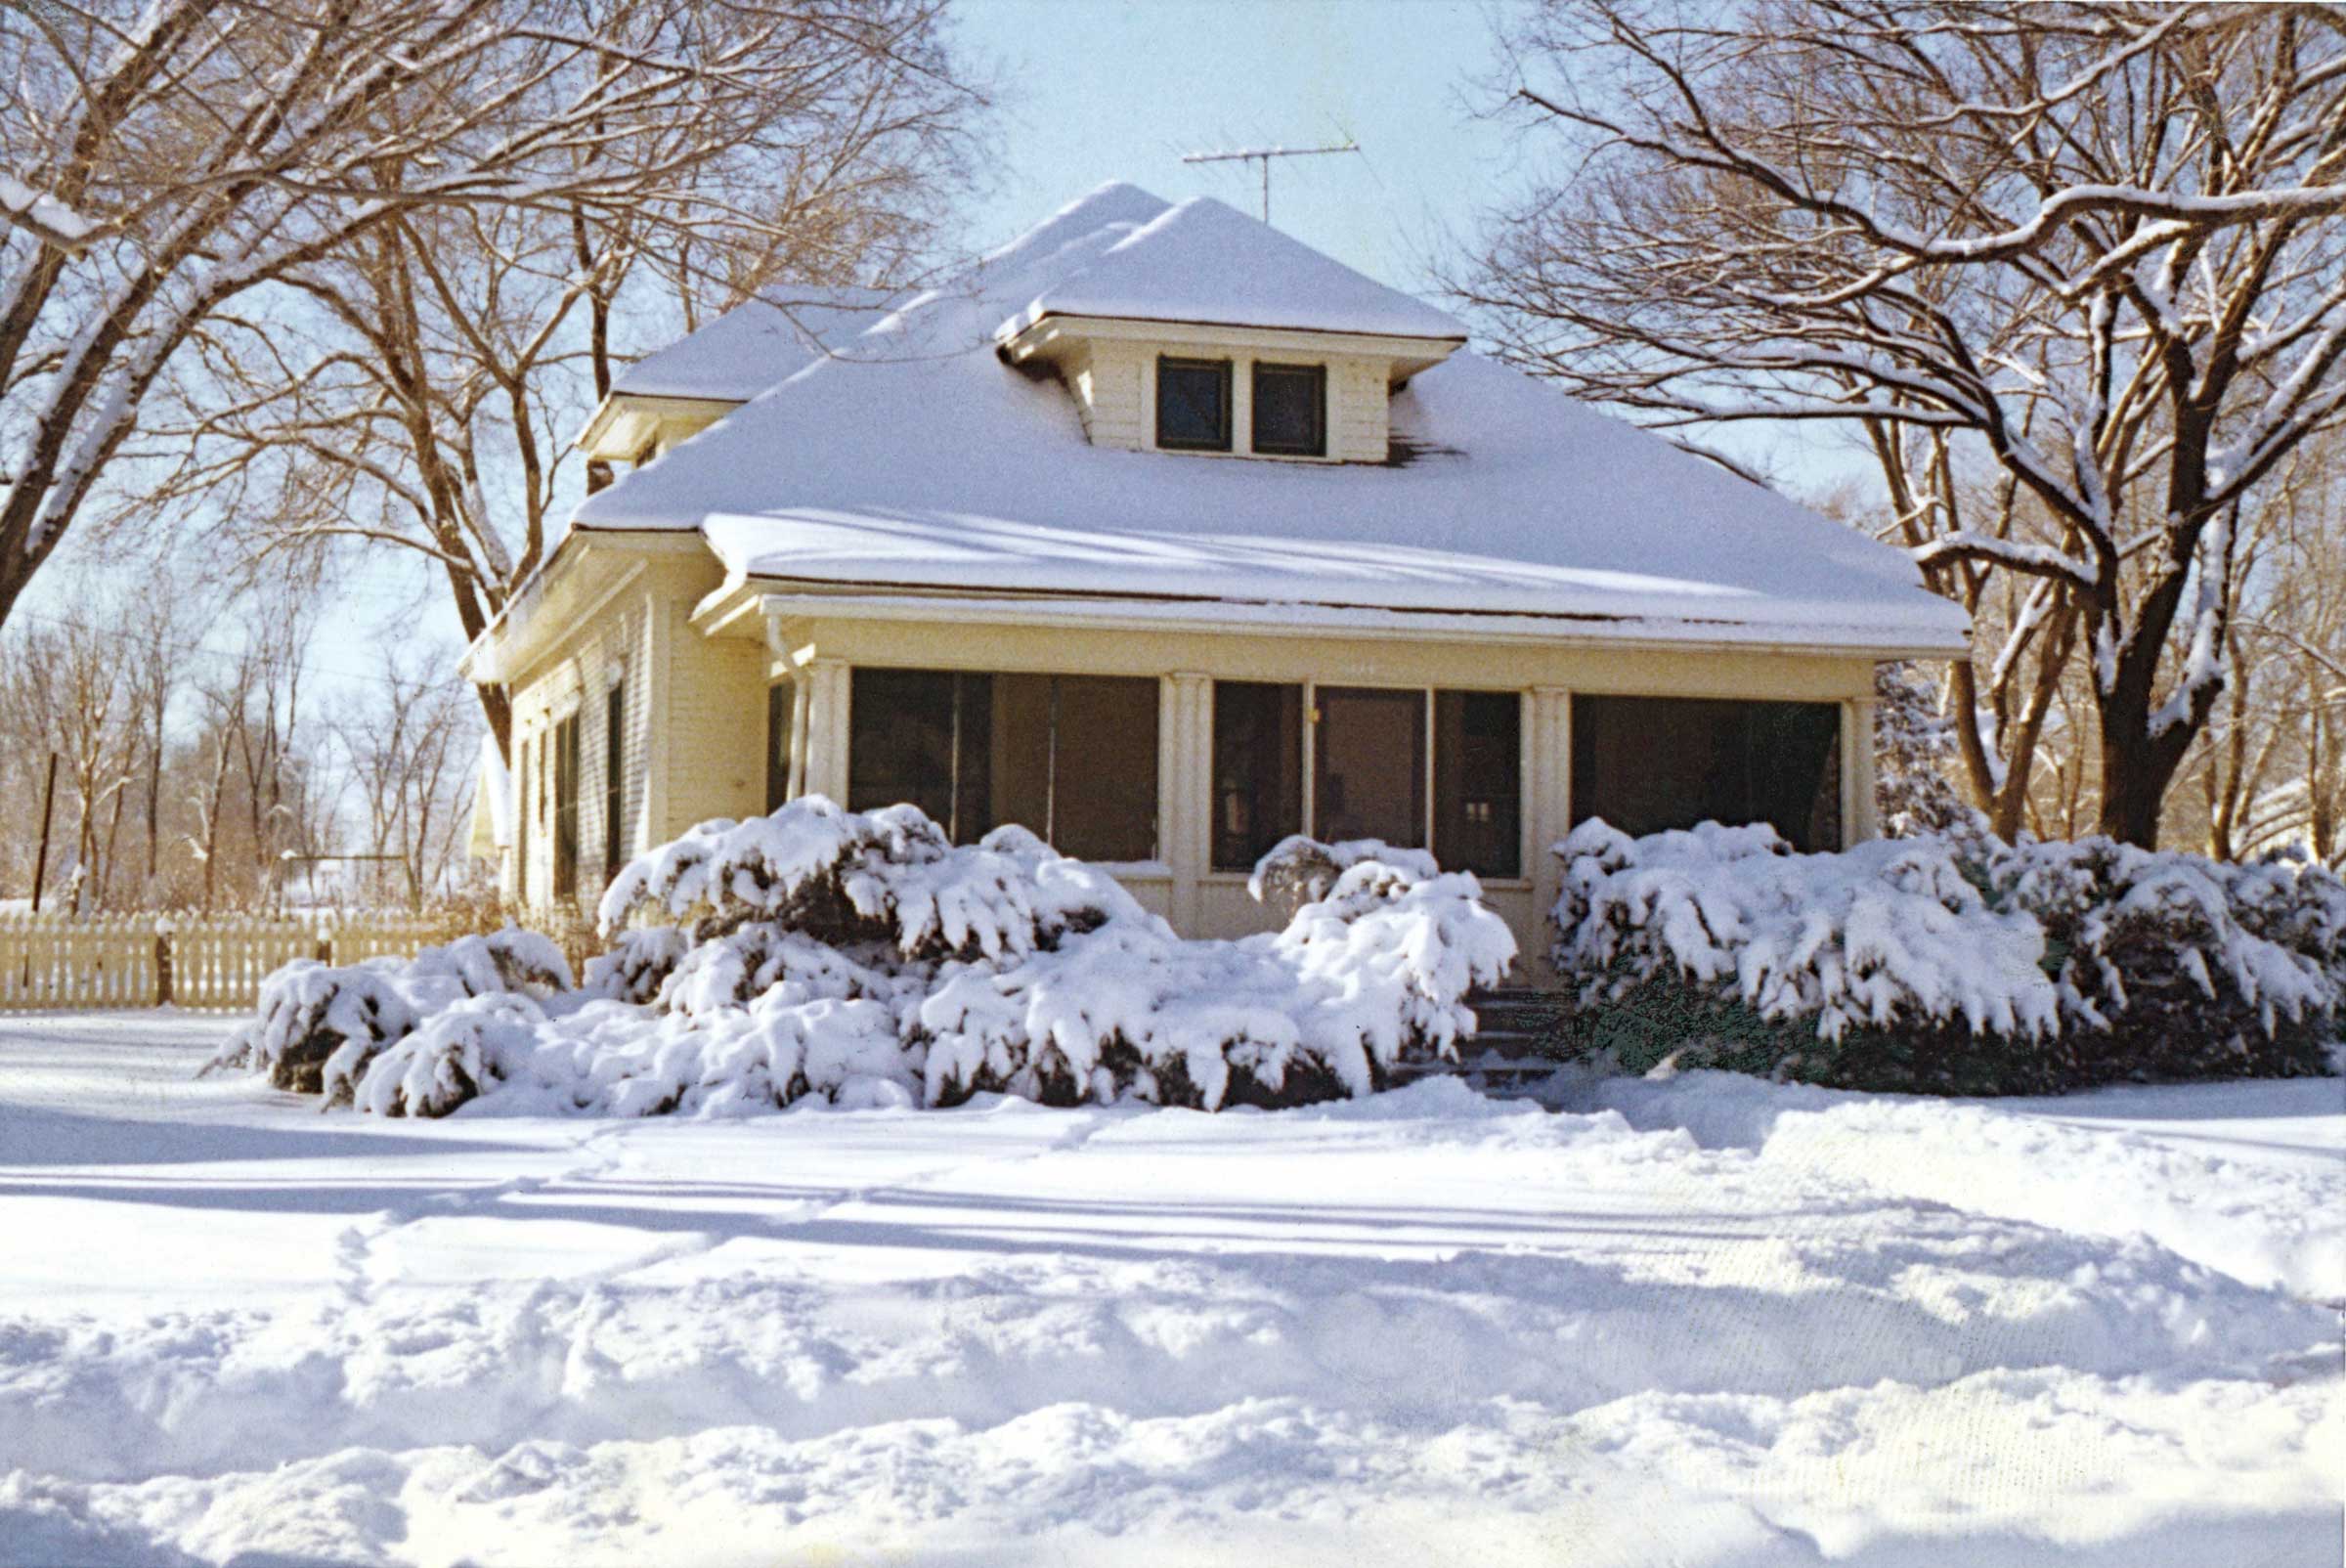 house with lawn, shrubs, and roof covered in snow